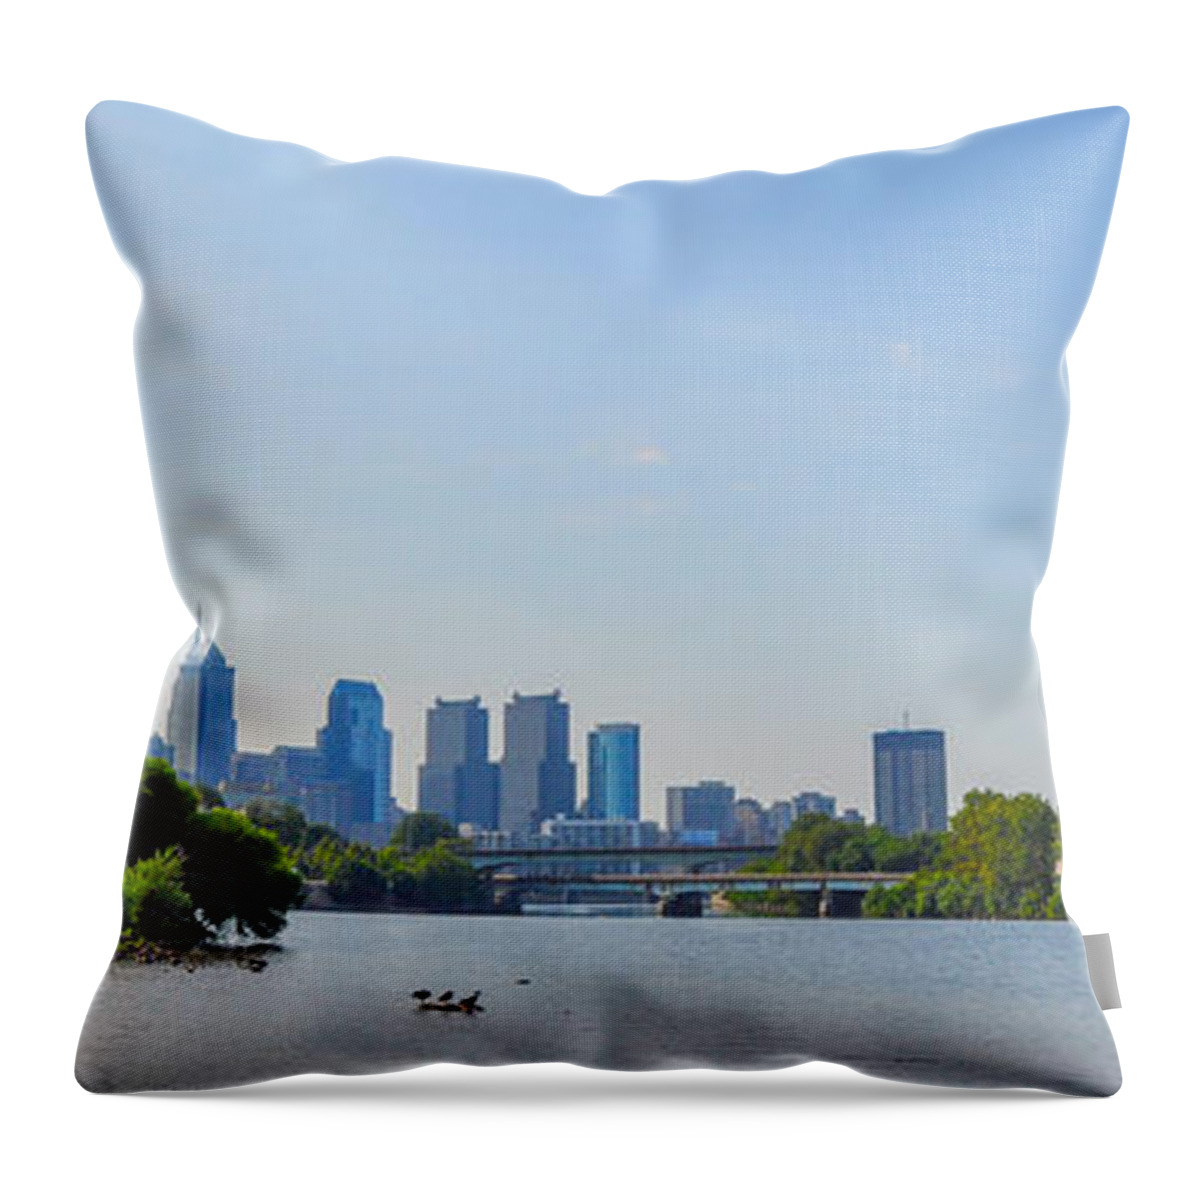 Schuylkill Throw Pillow featuring the photograph Schuylkill River Panorama - Philadelphia by Bill Cannon